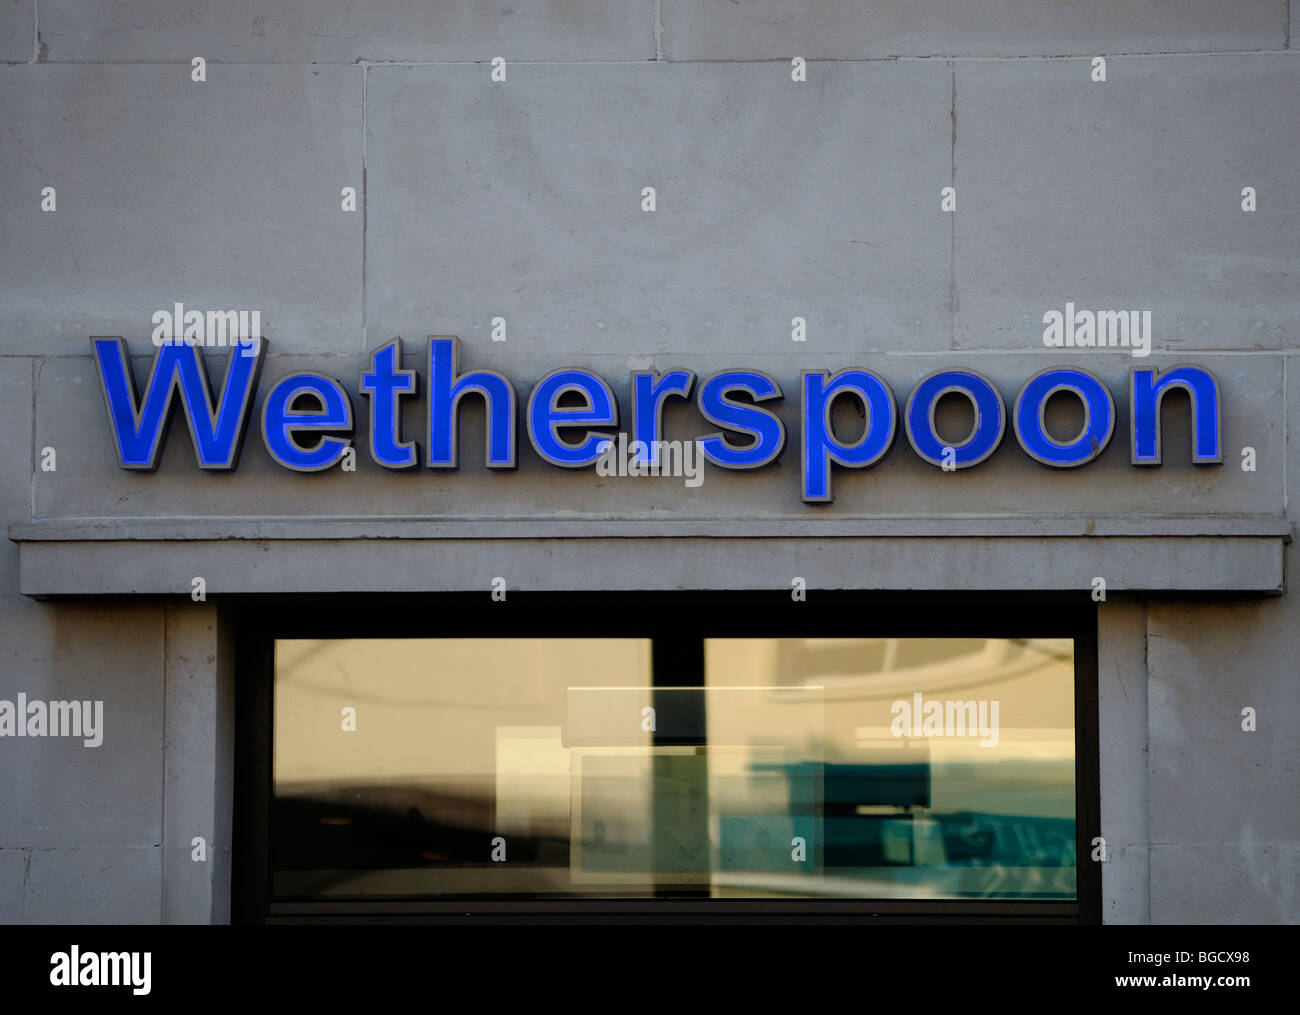 a wetherspoon pub sign, uk Stock Photo